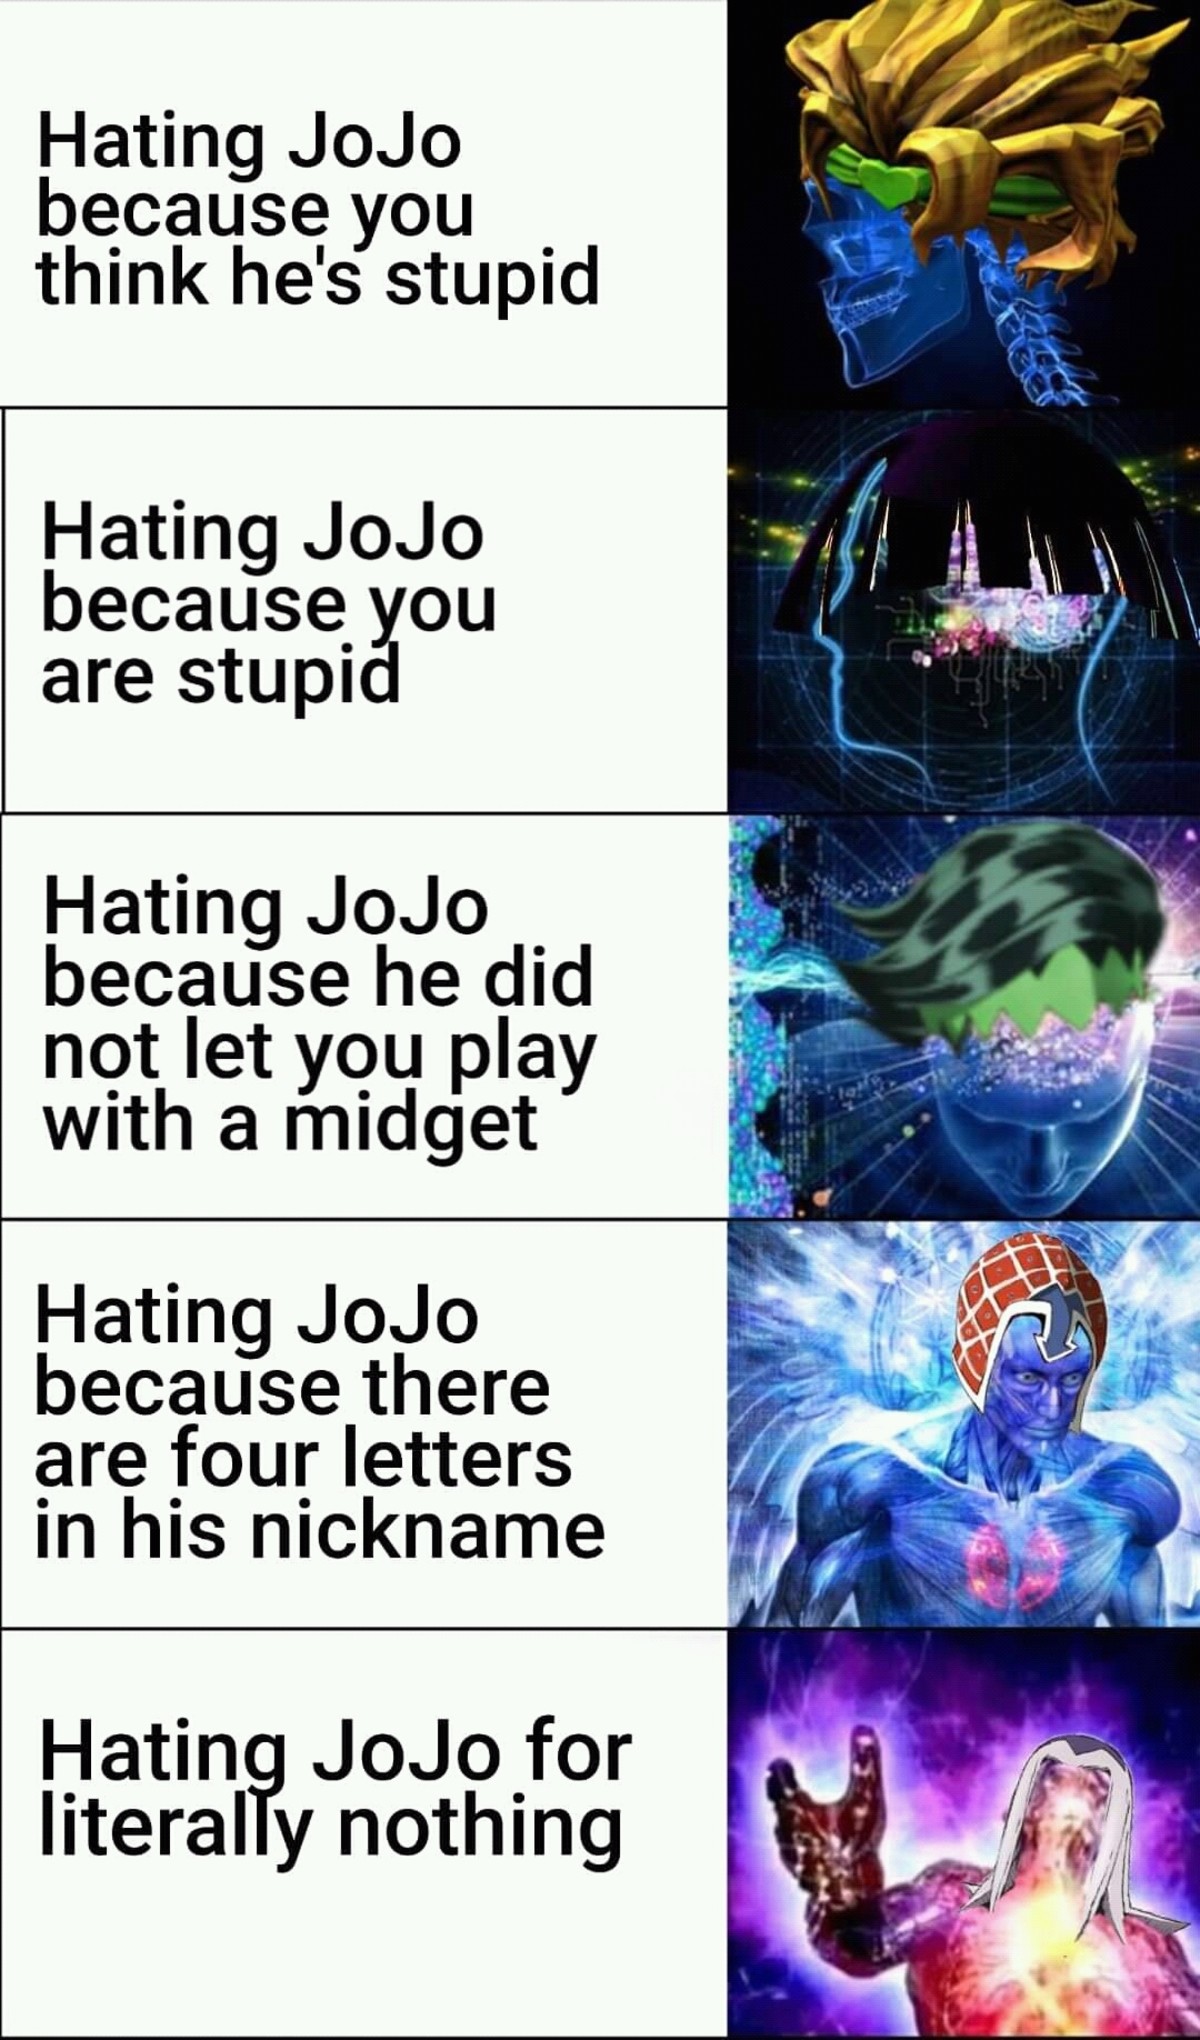 Hating JoJo. .. I've only read part 1 and parts of part 2, but didn't Dio love Jonathan? And only went after him in a sort of Joker / Batman way. To prove that his idol isn't a